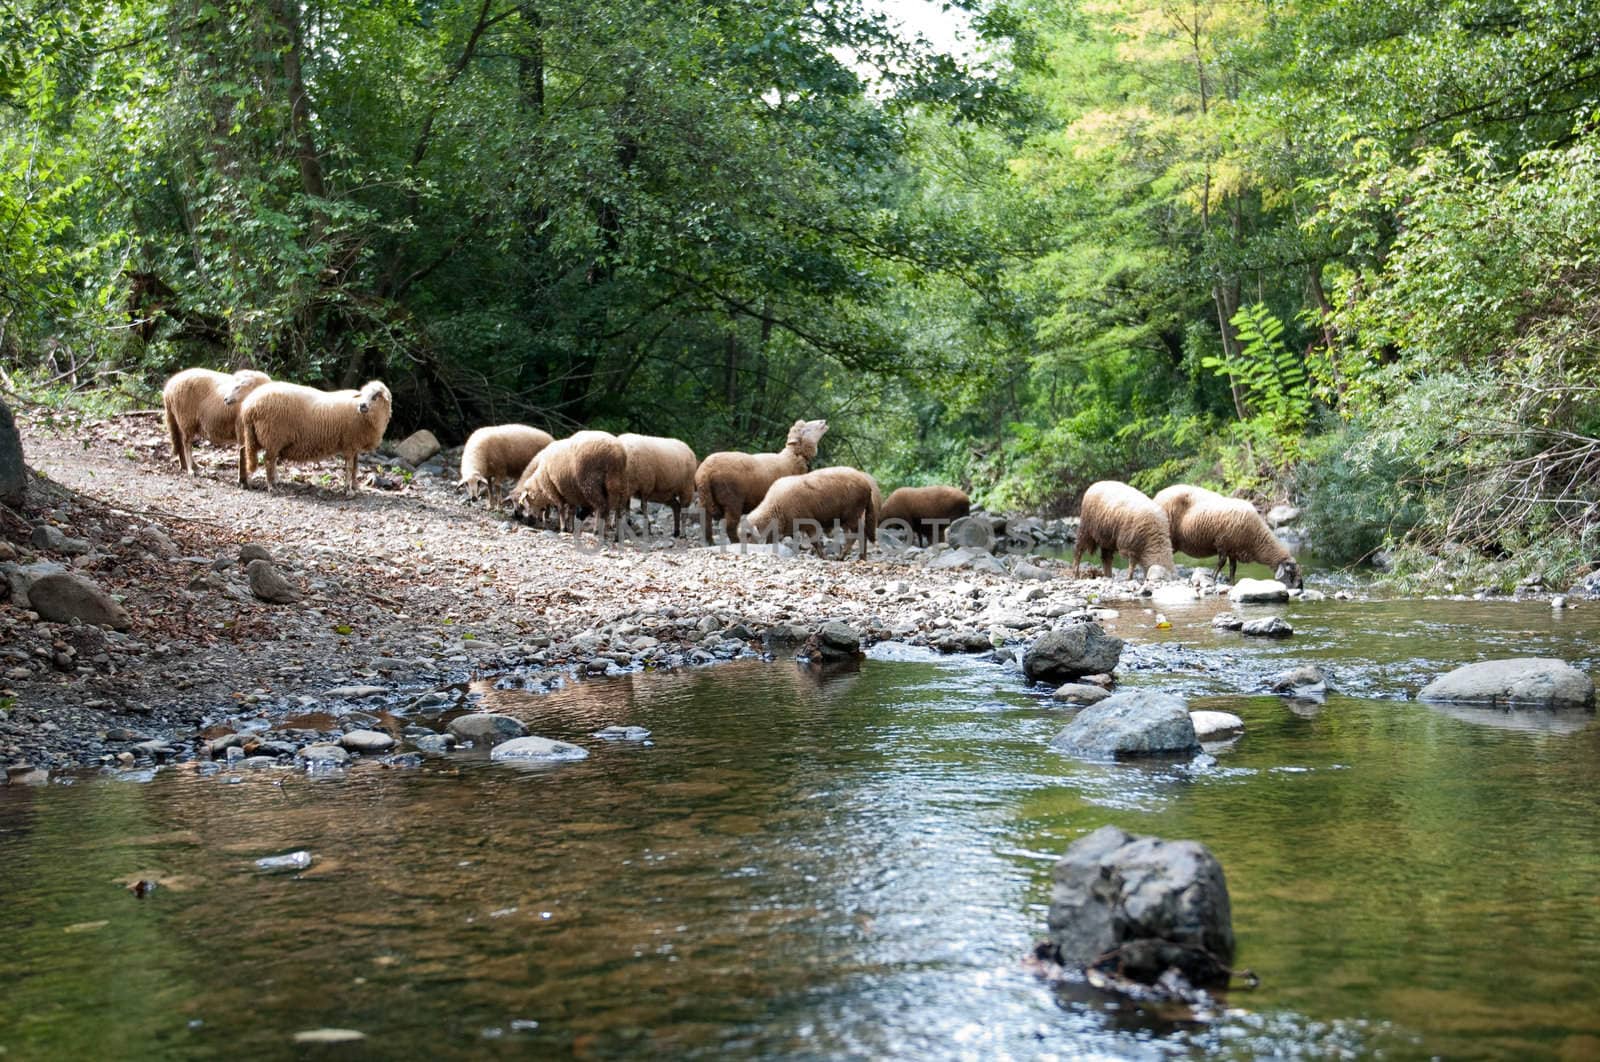 Number of sheeps at watering near the river